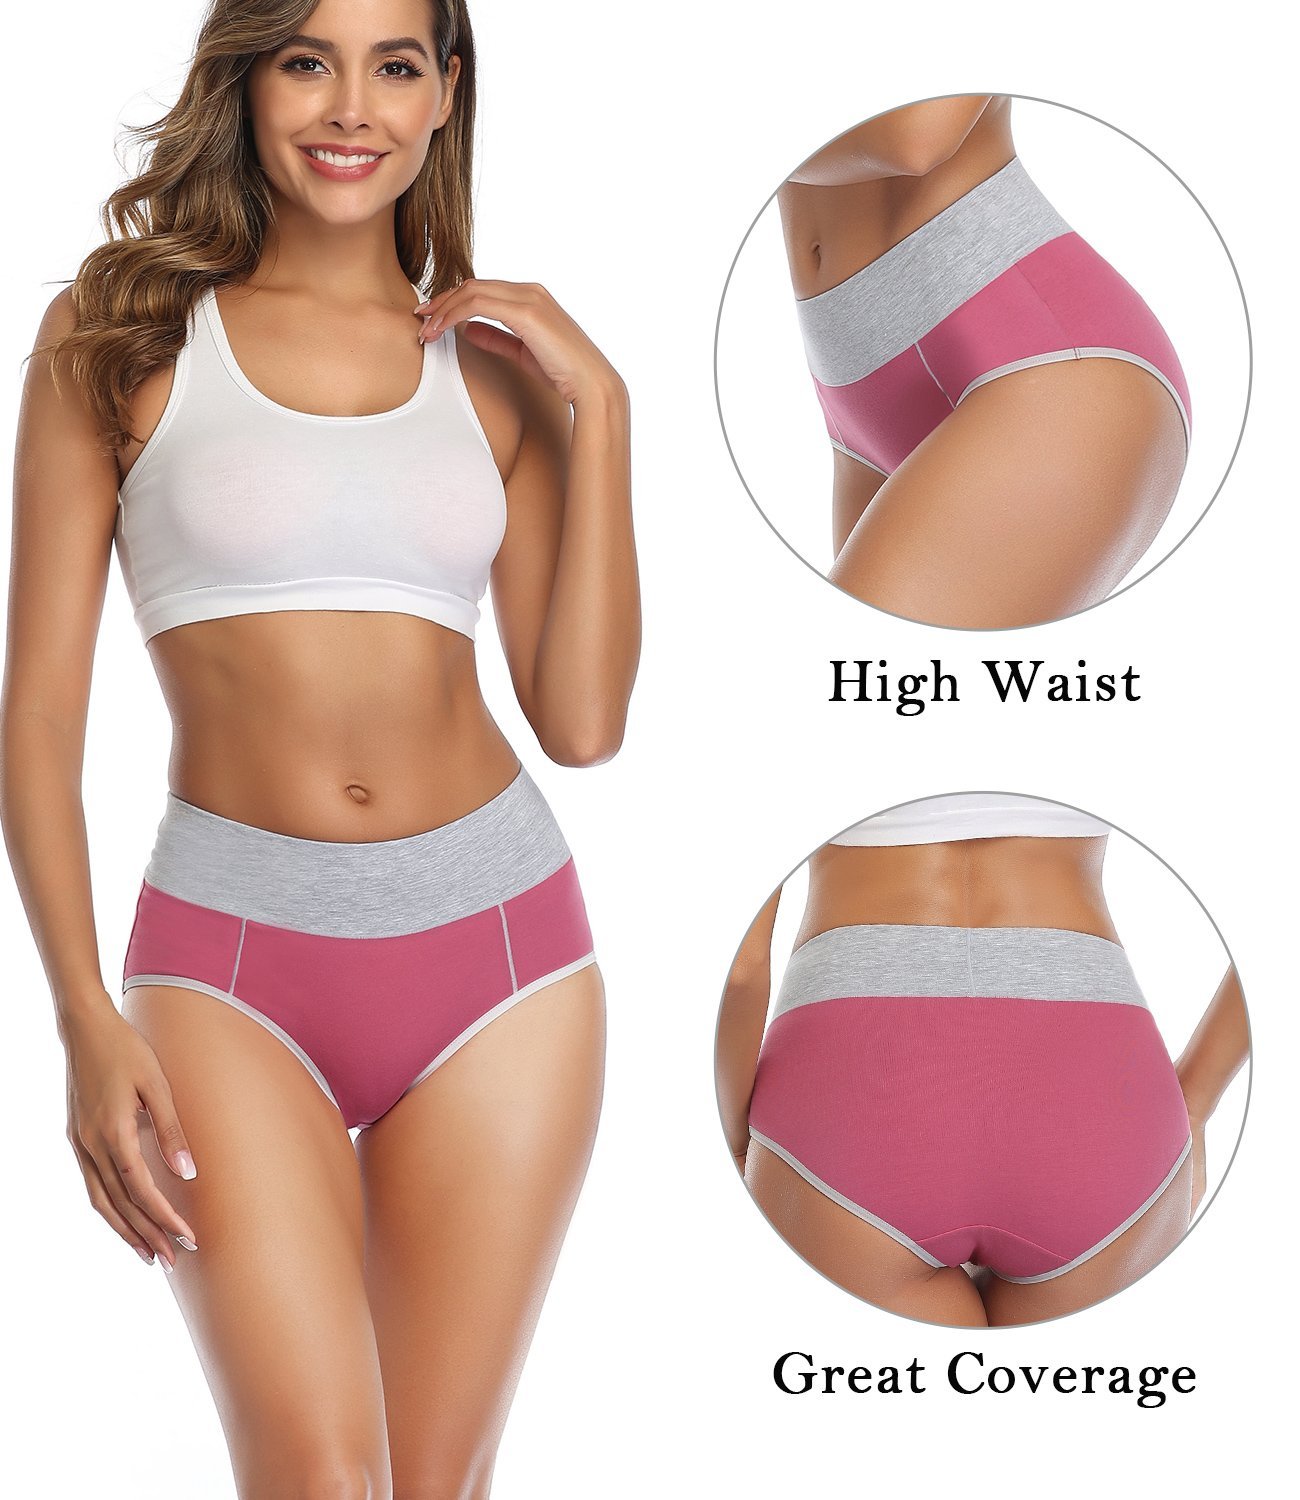 wirarpa Women's 5 Pack Cotton Underwear High Waisted Full - Import It All